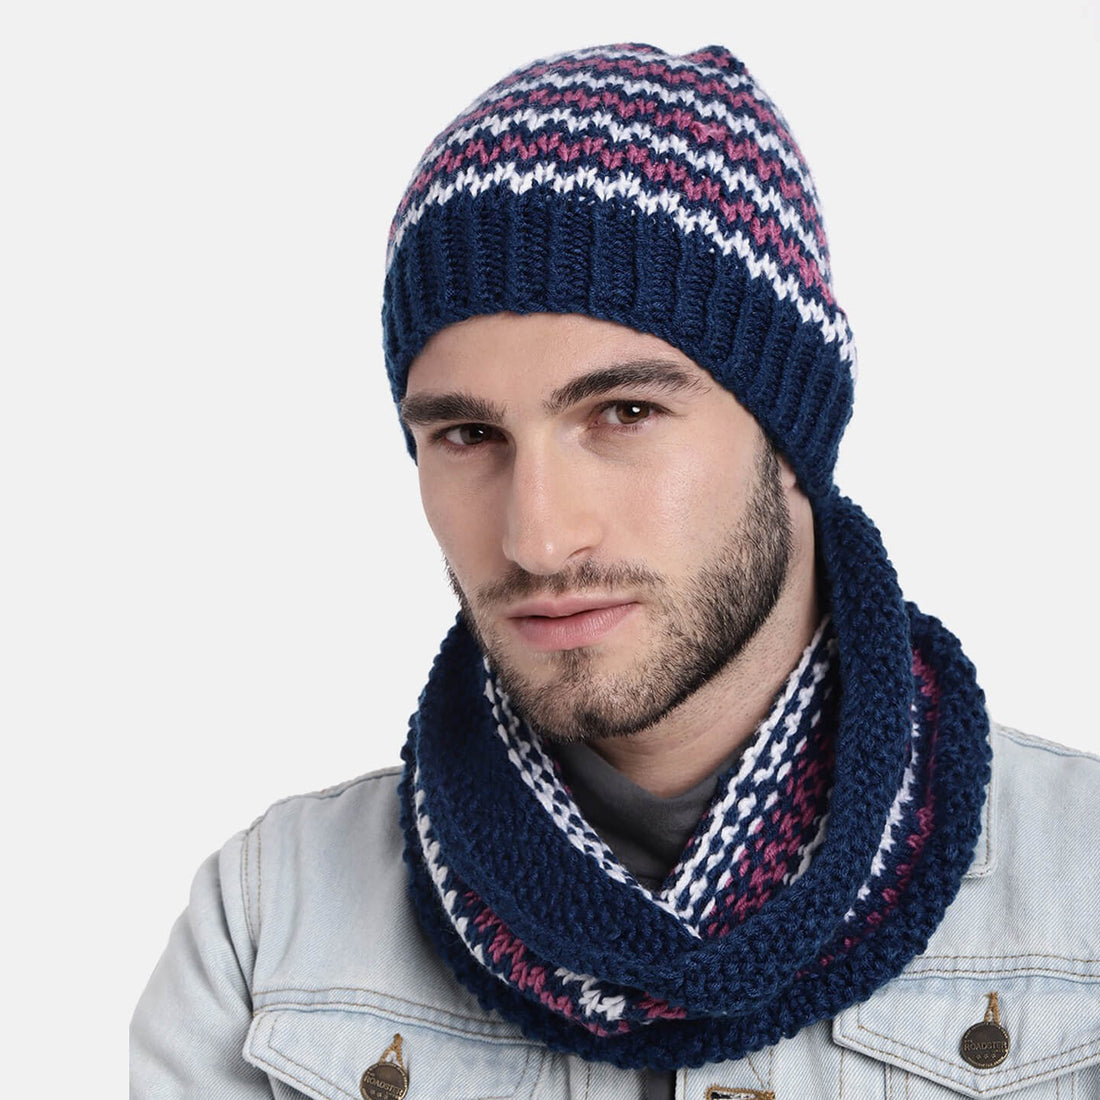 Double-Knit Cap and Neckwarmer Set - 2515